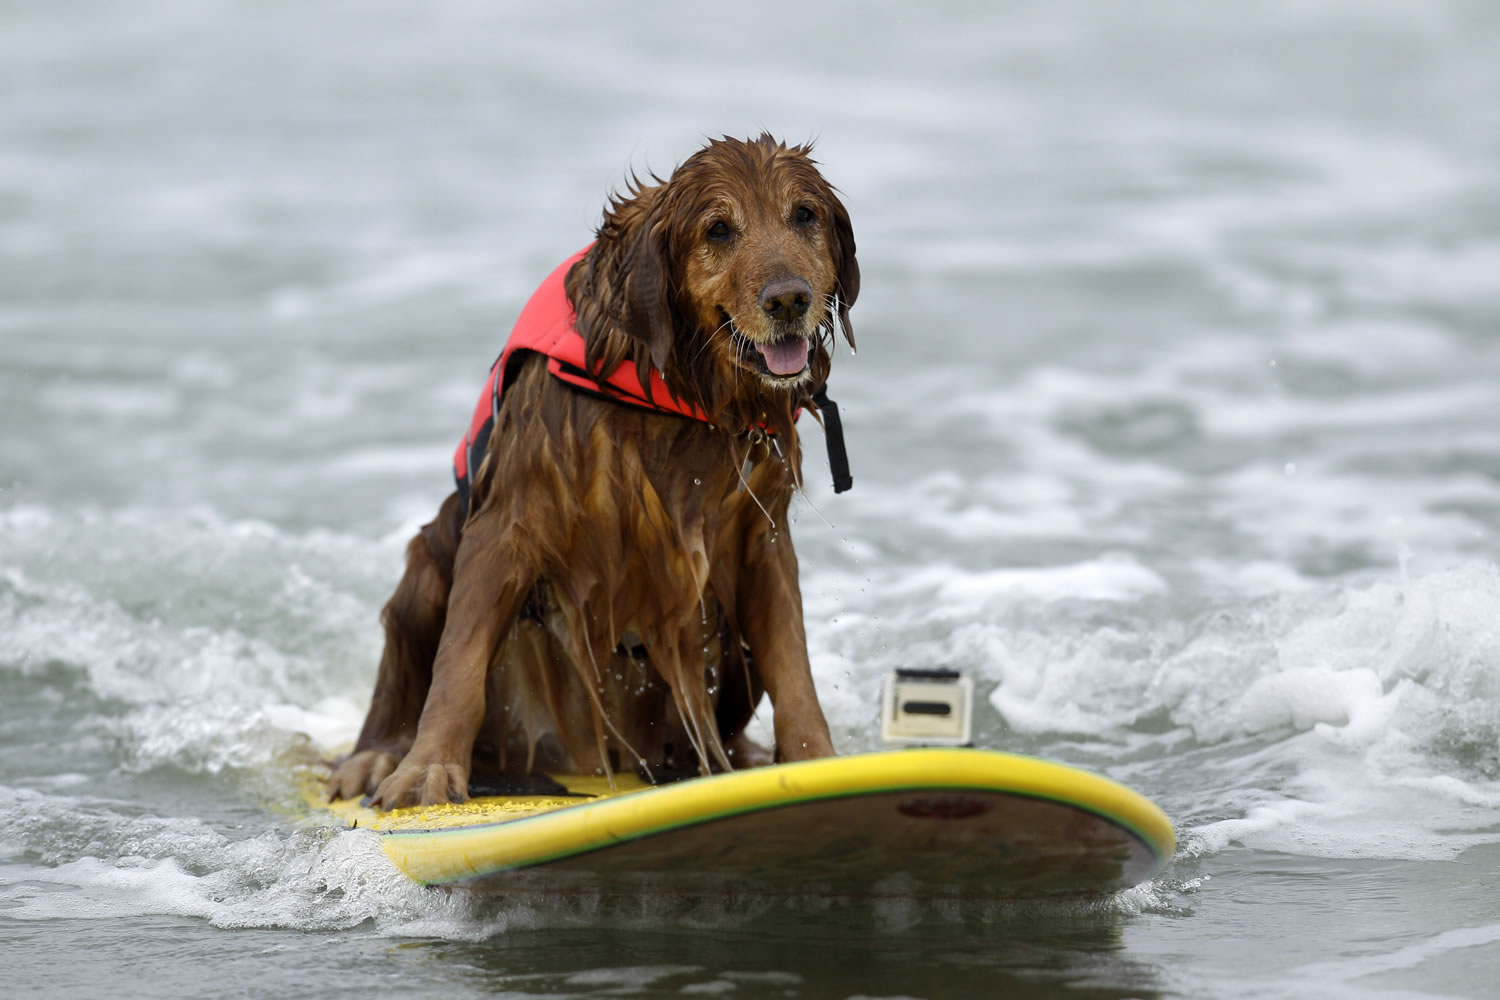 King, a 9-year-old golden retriever, surfs in the Incredible Dog Challenge competition in San Diego. Of about 95,000 miles of U.S.